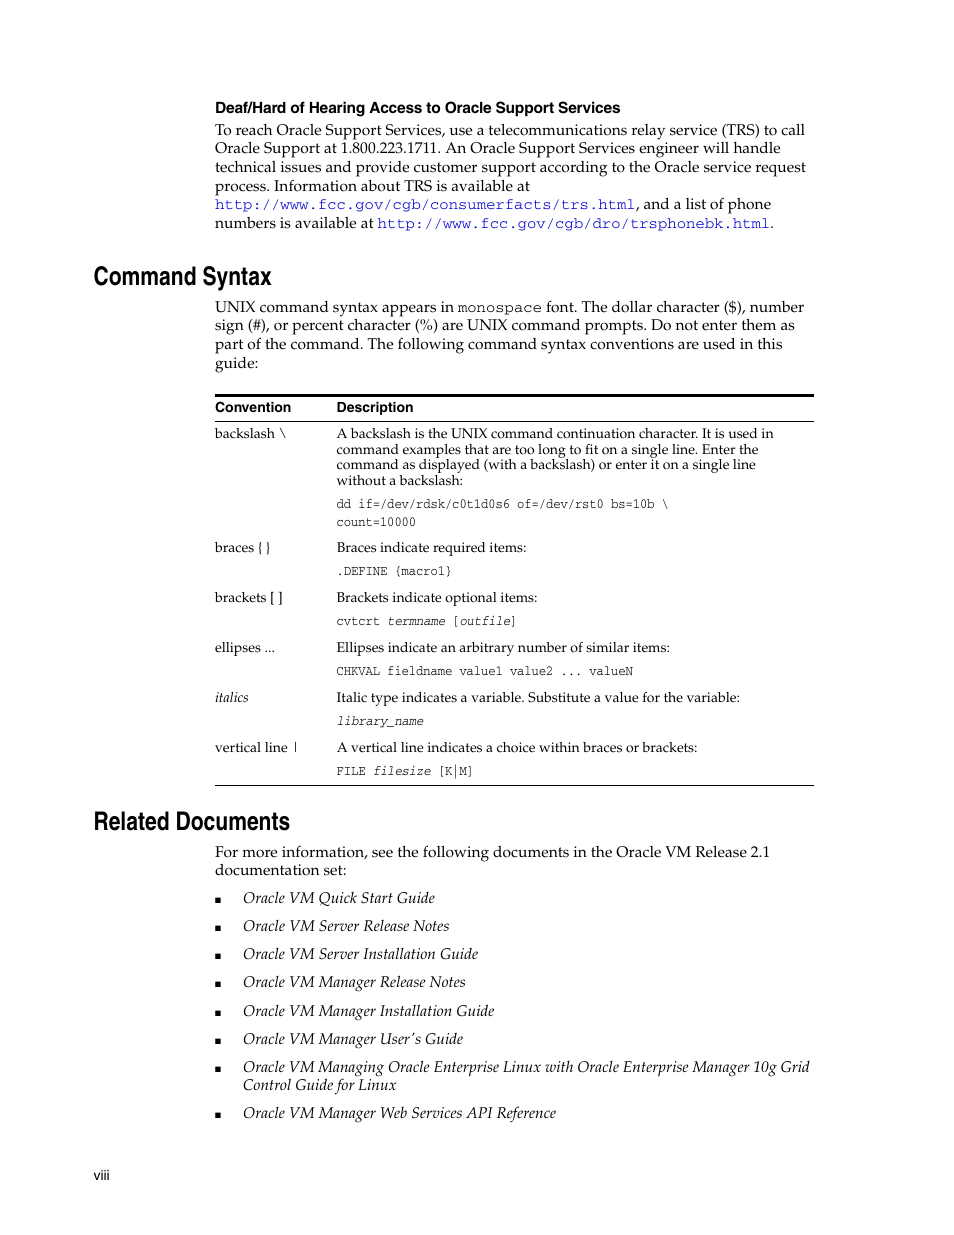 Command syntax, Related documents | Oracle Audio Technologies E10898-02 User Manual | Page 8 / 112